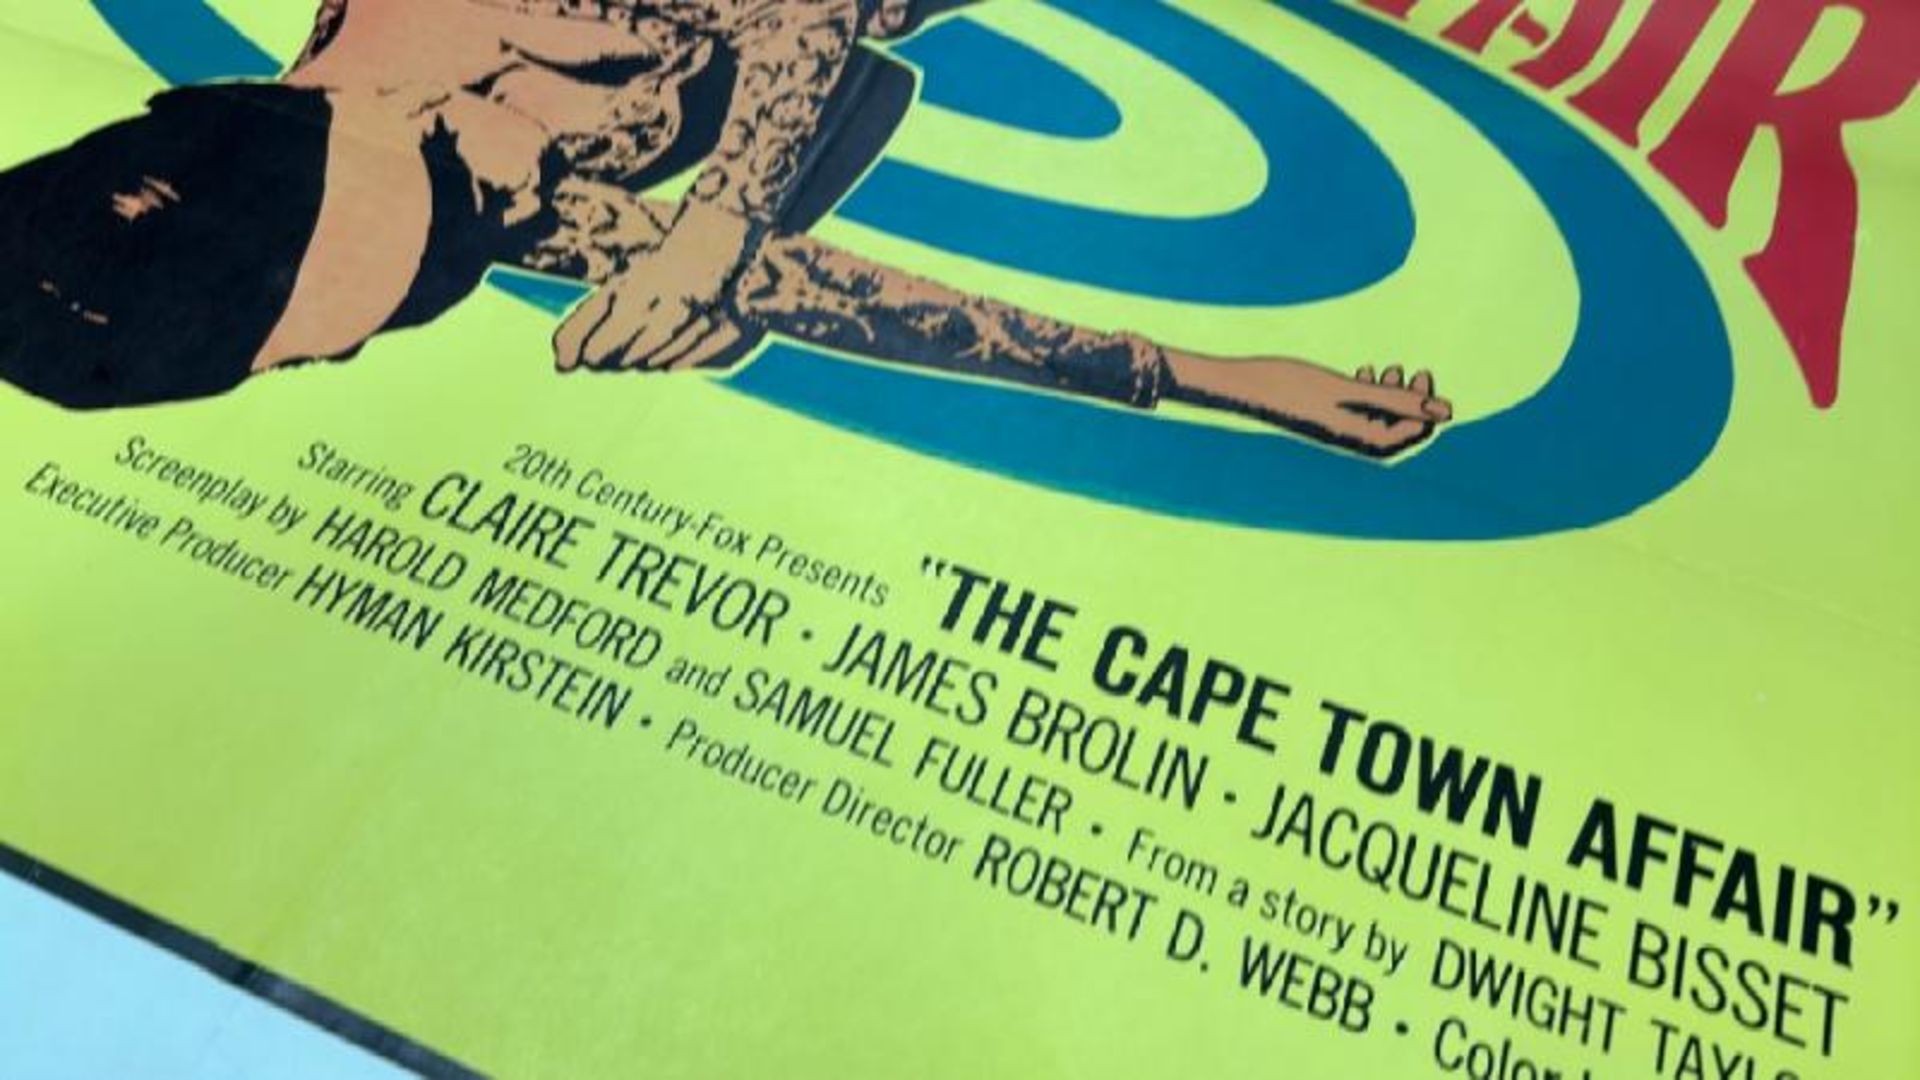 THE CAPE TOWN AFFAIR, ORIGINAL FILM POSTER, PRINTED IN THE USA, 69CM W X 104CM H - Image 2 of 4